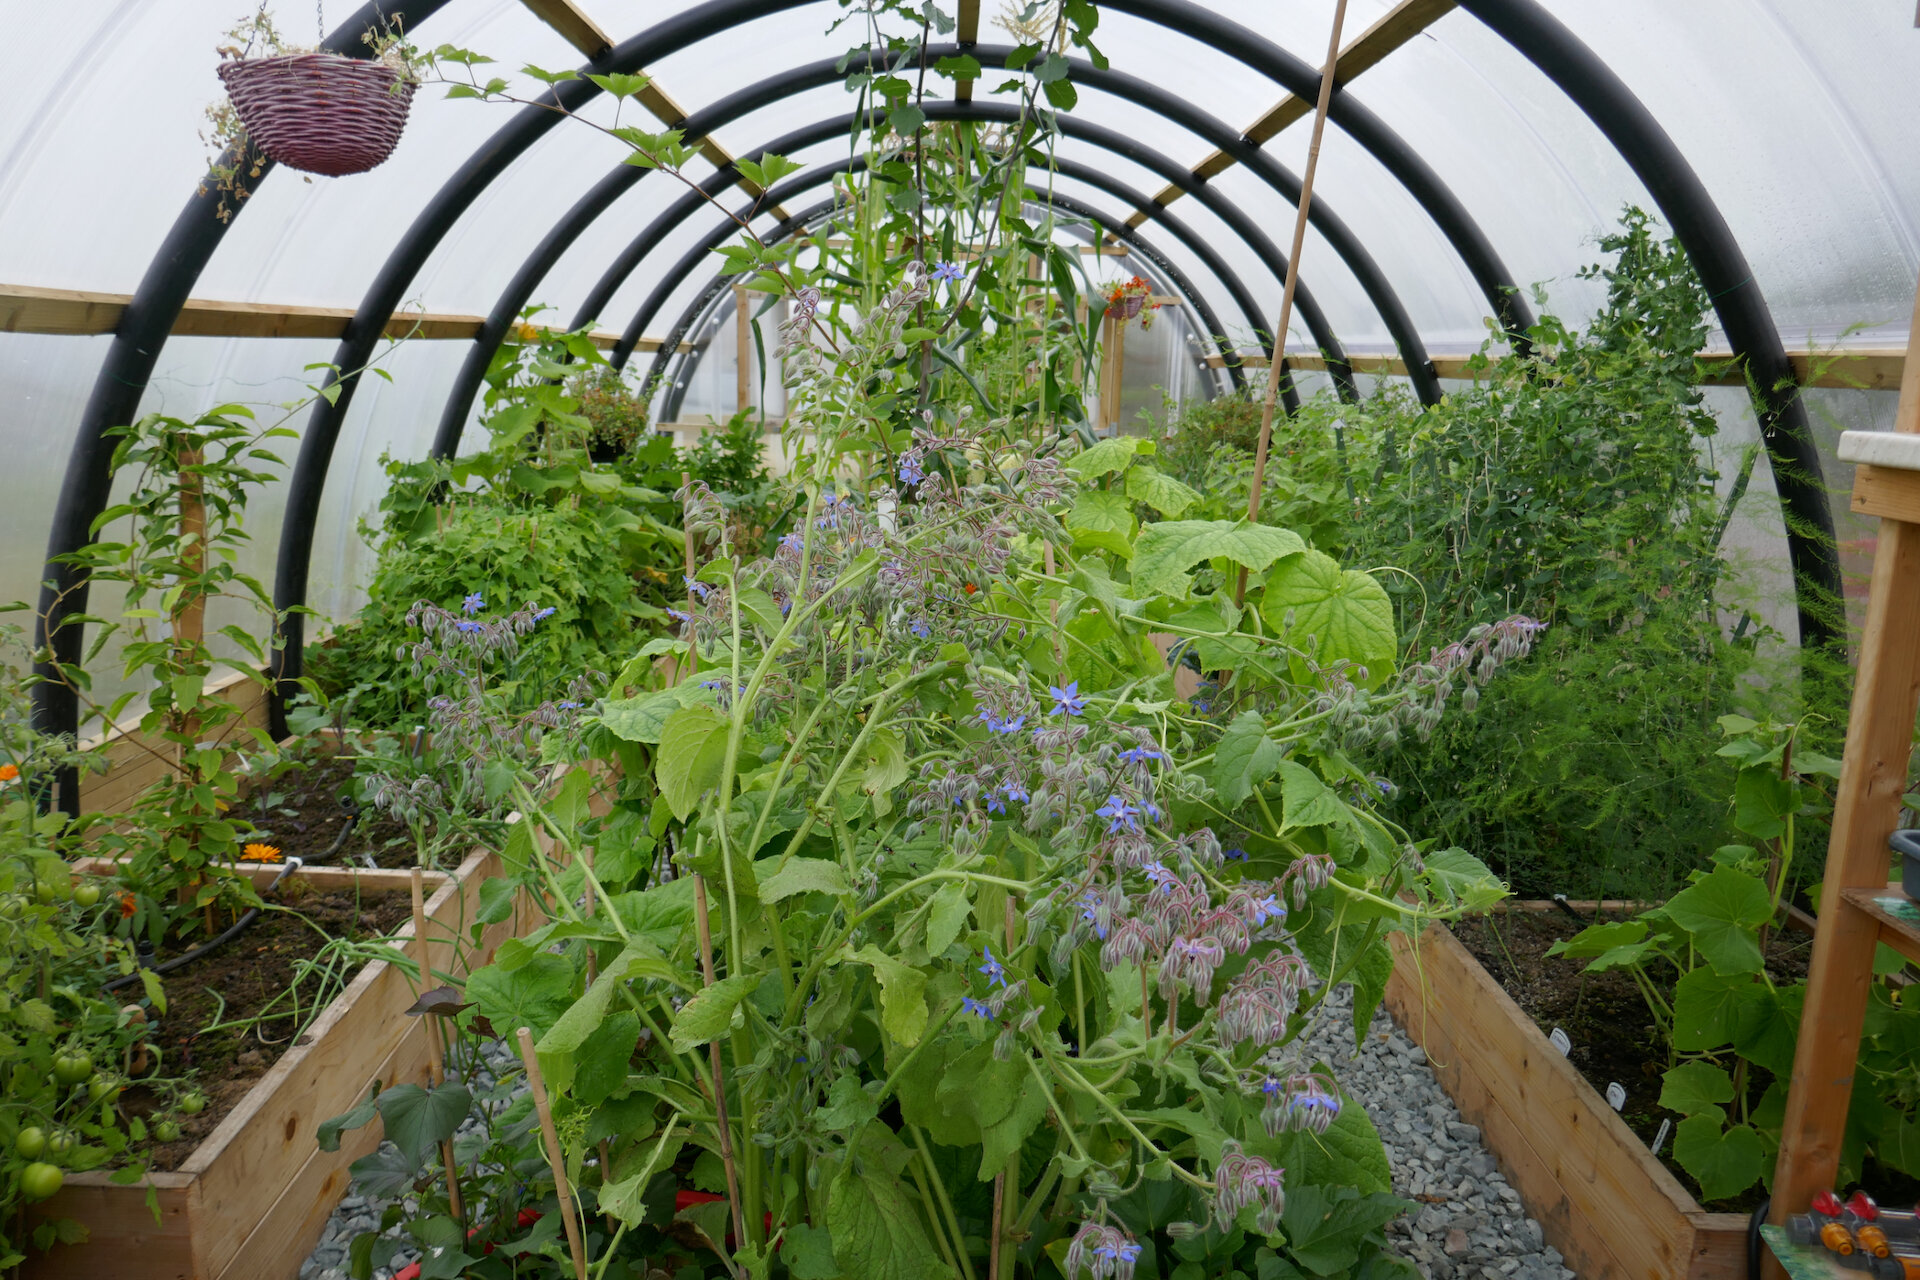 People grow vegetables in Polycrub tunnels across the islands